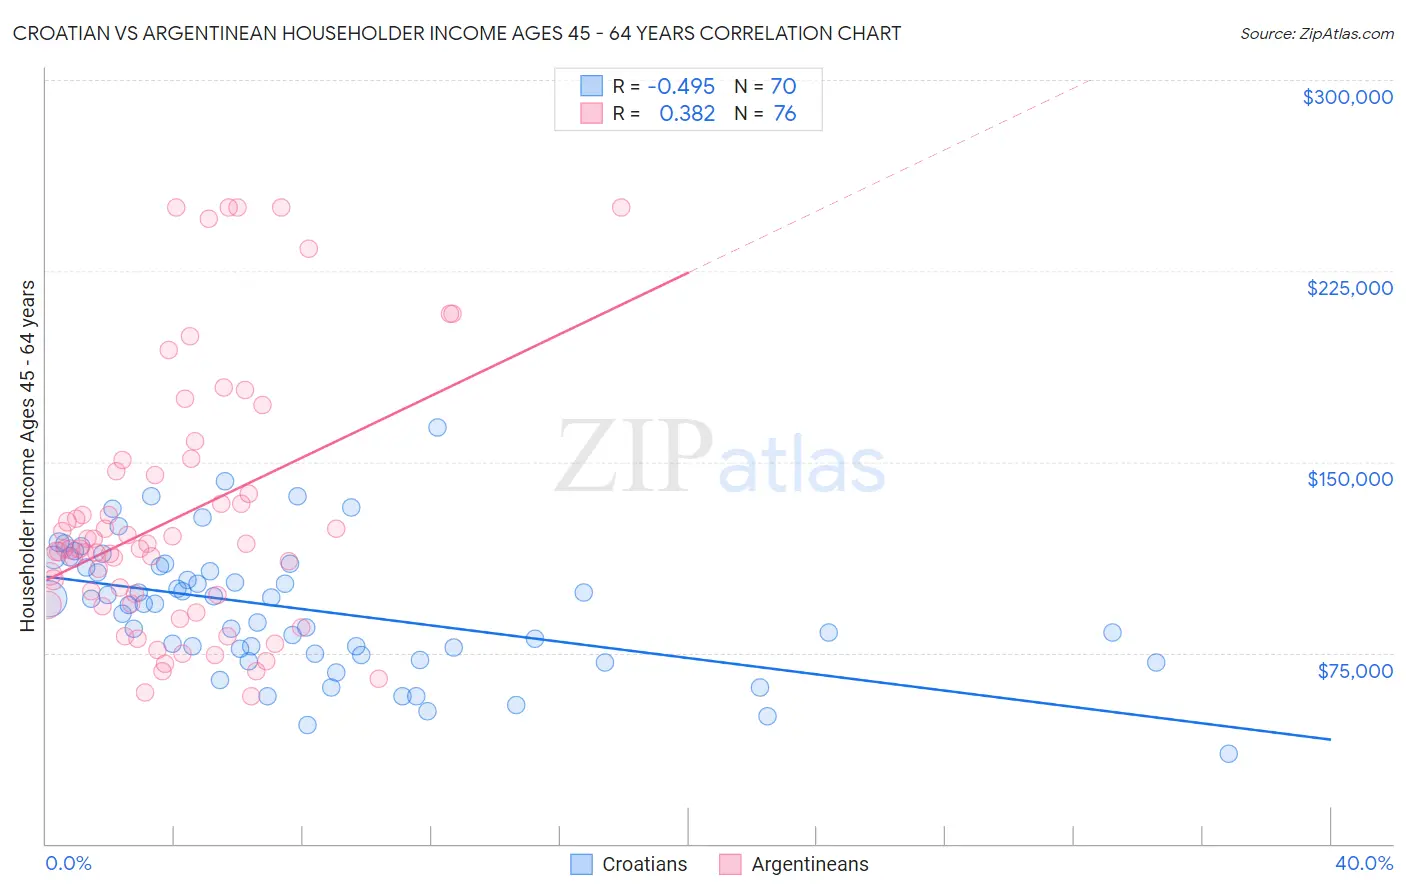 Croatian vs Argentinean Householder Income Ages 45 - 64 years